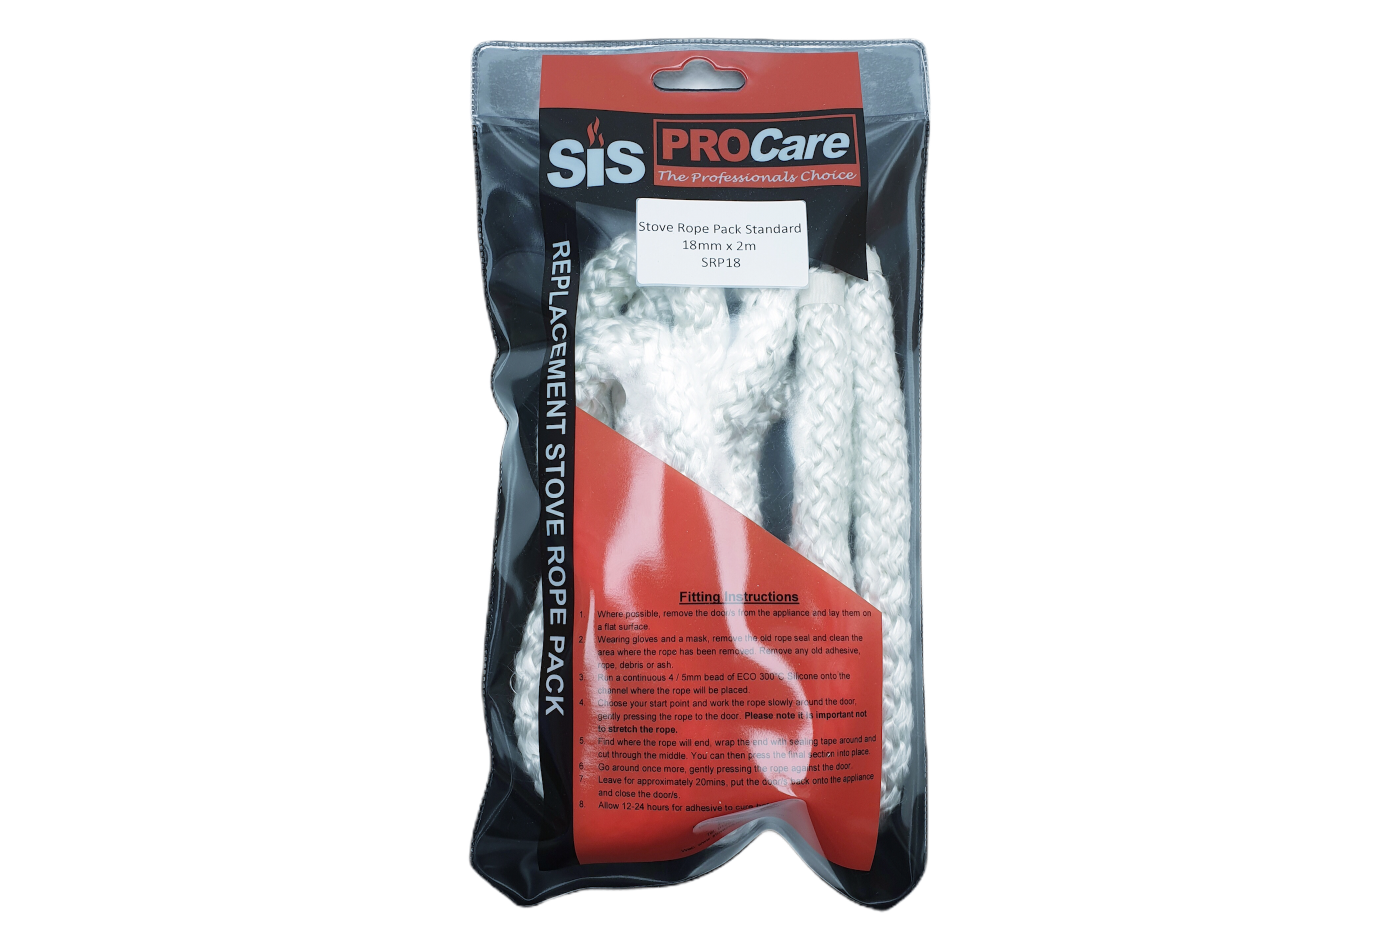 SiS Procare White 18 milimetre x 2 metre Standard Stove Rope Pack - product code SRP18